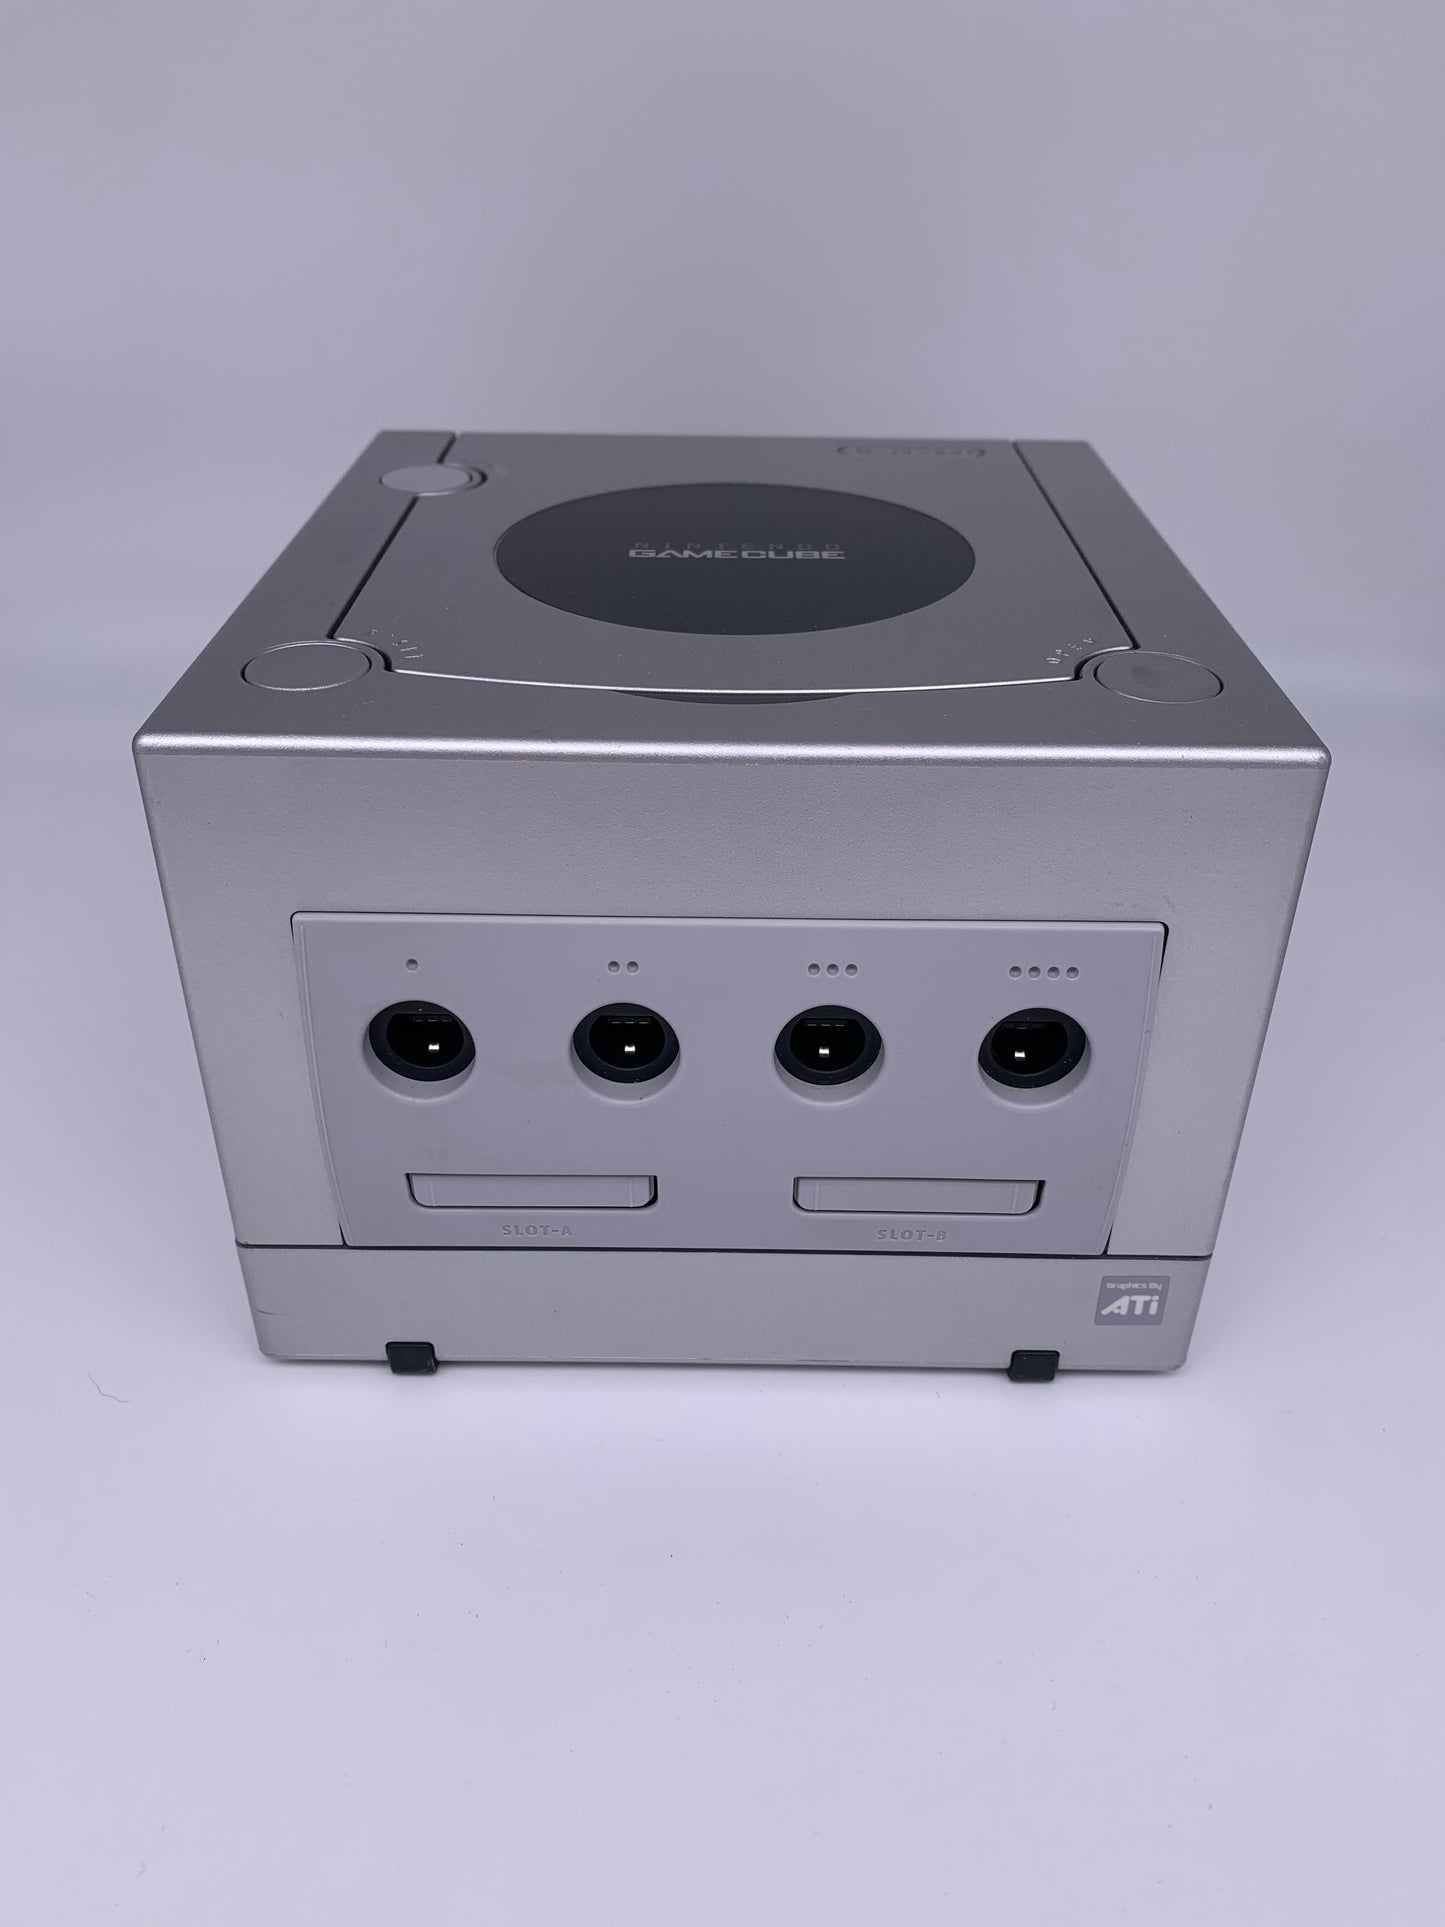 NiNTENDO GAMECUBE [NGC] CONSOLE | SILVER MODEL SiLVER DOL-001 USA | LIMITED EDiTiON PLATiNUM